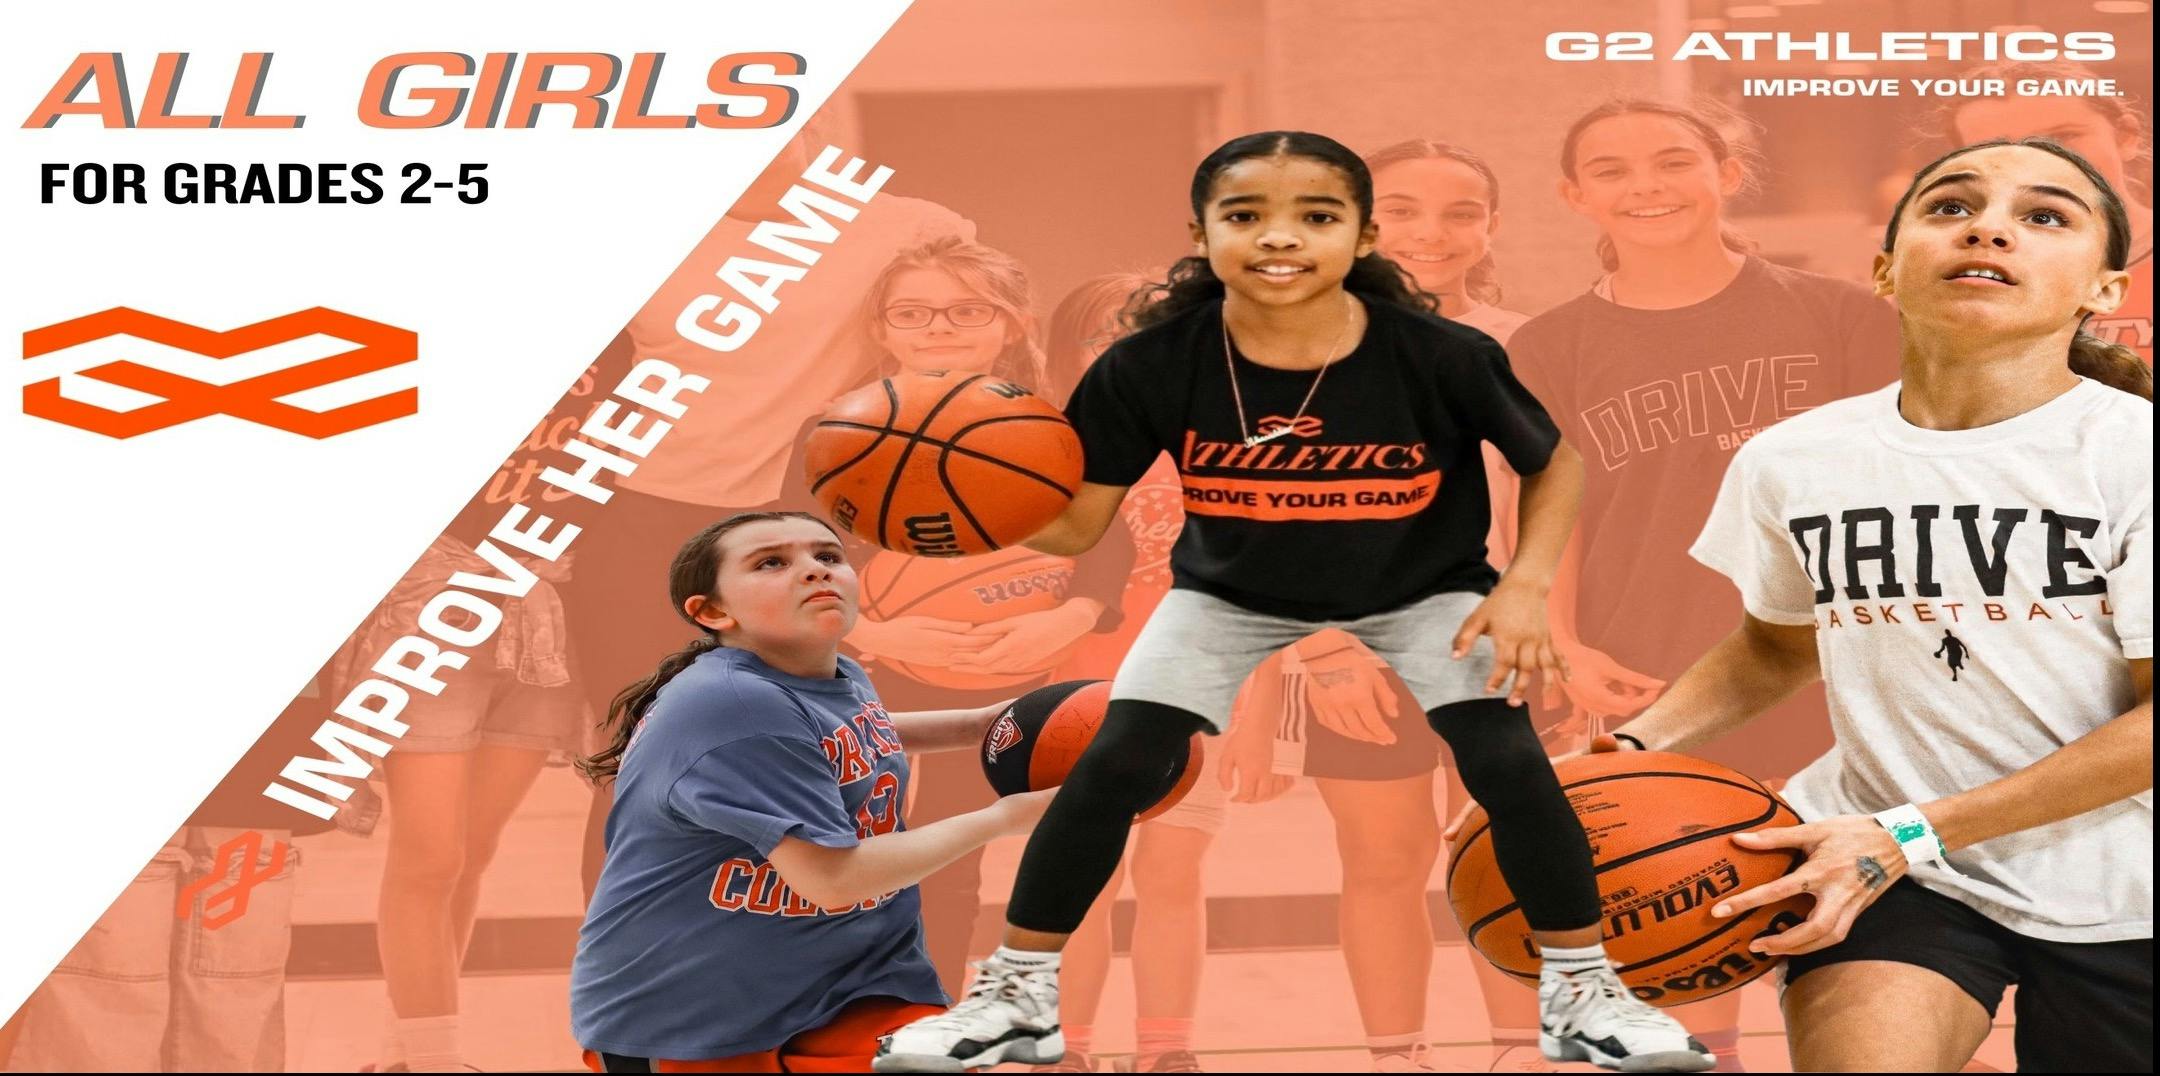 Free Drop In Basketball for GIRLS grade 2-5 